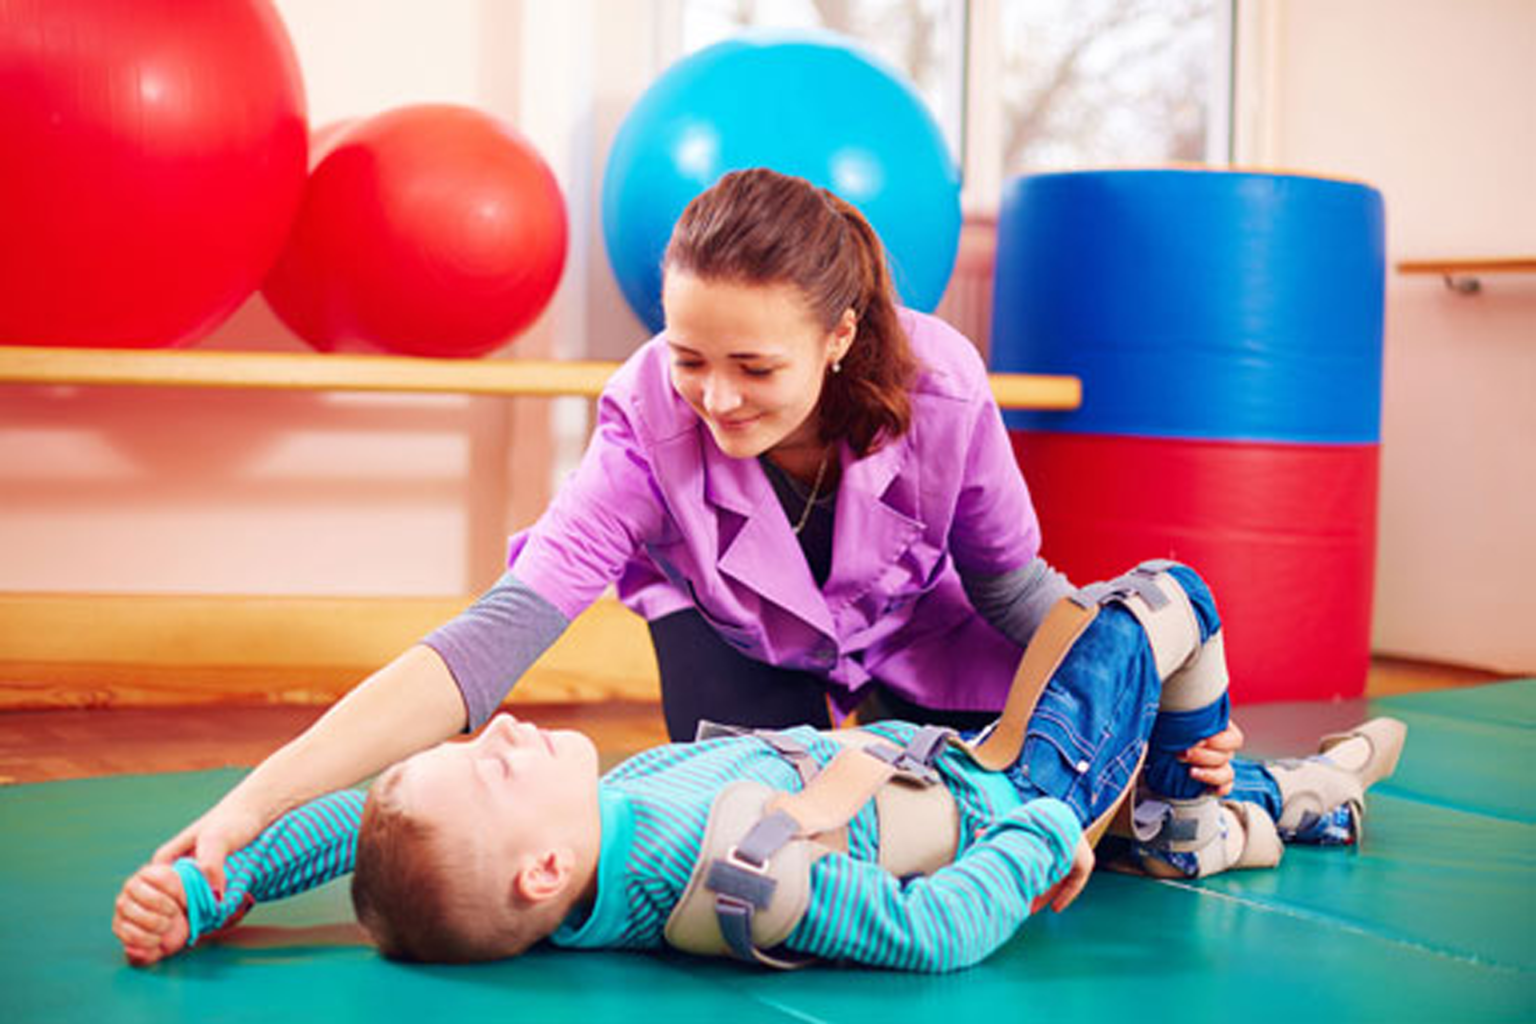 Pediatrician and children therapy | Triumph Therapeutics | Speech Therapy, Occupational Therapy, Physical Therapy in Washington DC